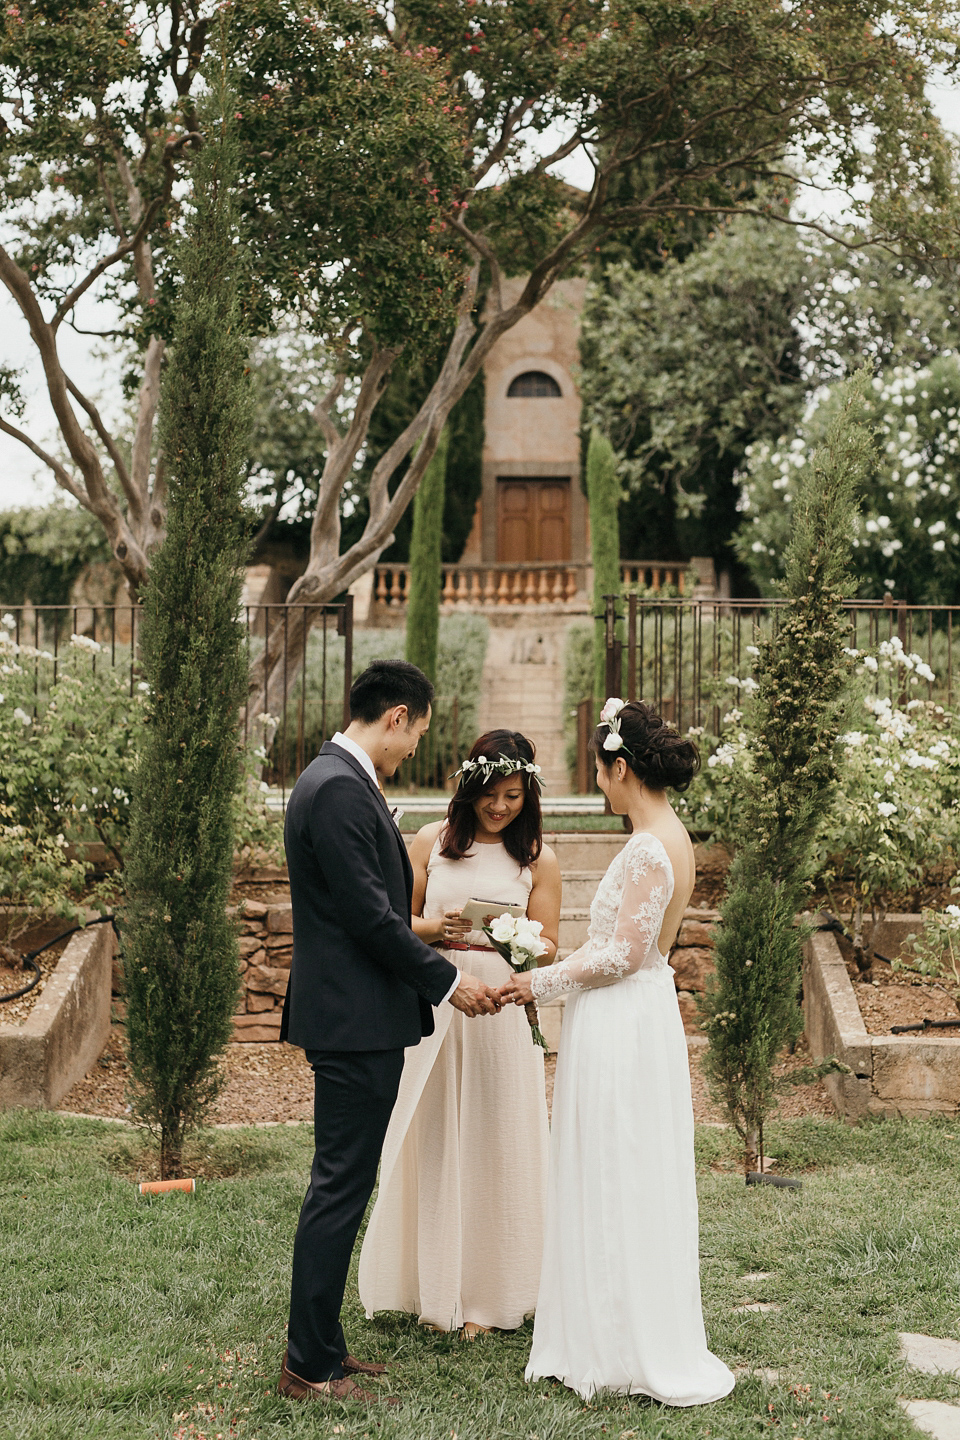 A first look and floral crown for an elegant and intimate chateau wedding in the South of France. Photography by Sabestien Boudot.